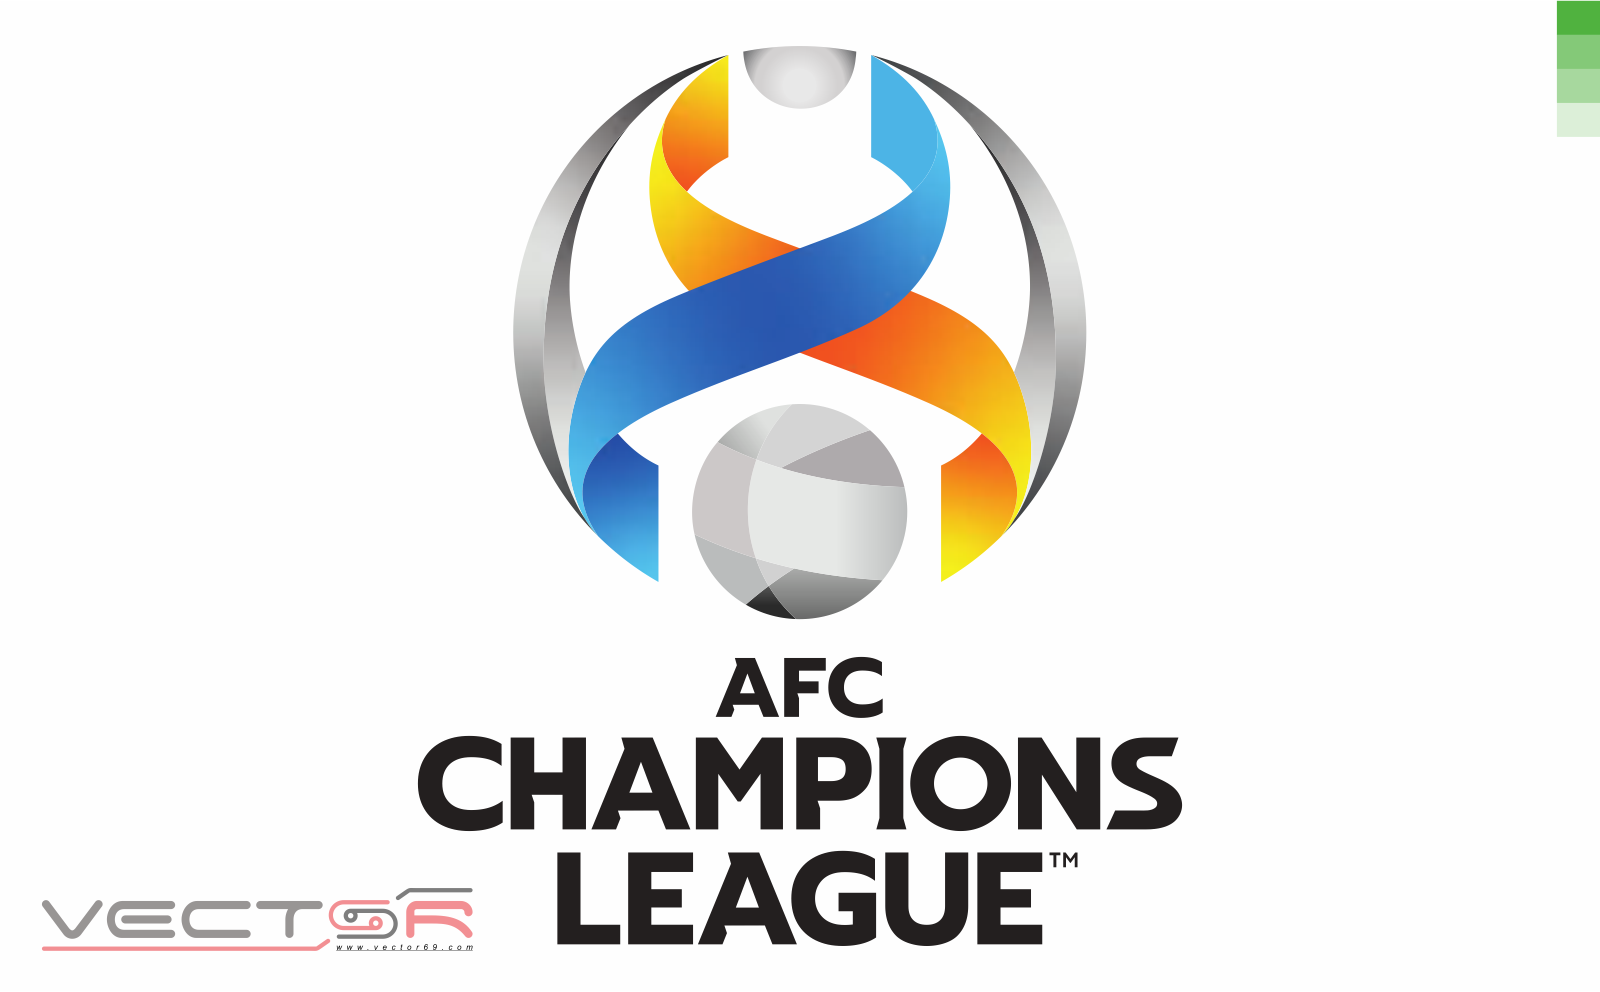 AFC Champions League (ACL) Logo - Download Vector File CDR (CorelDraw)